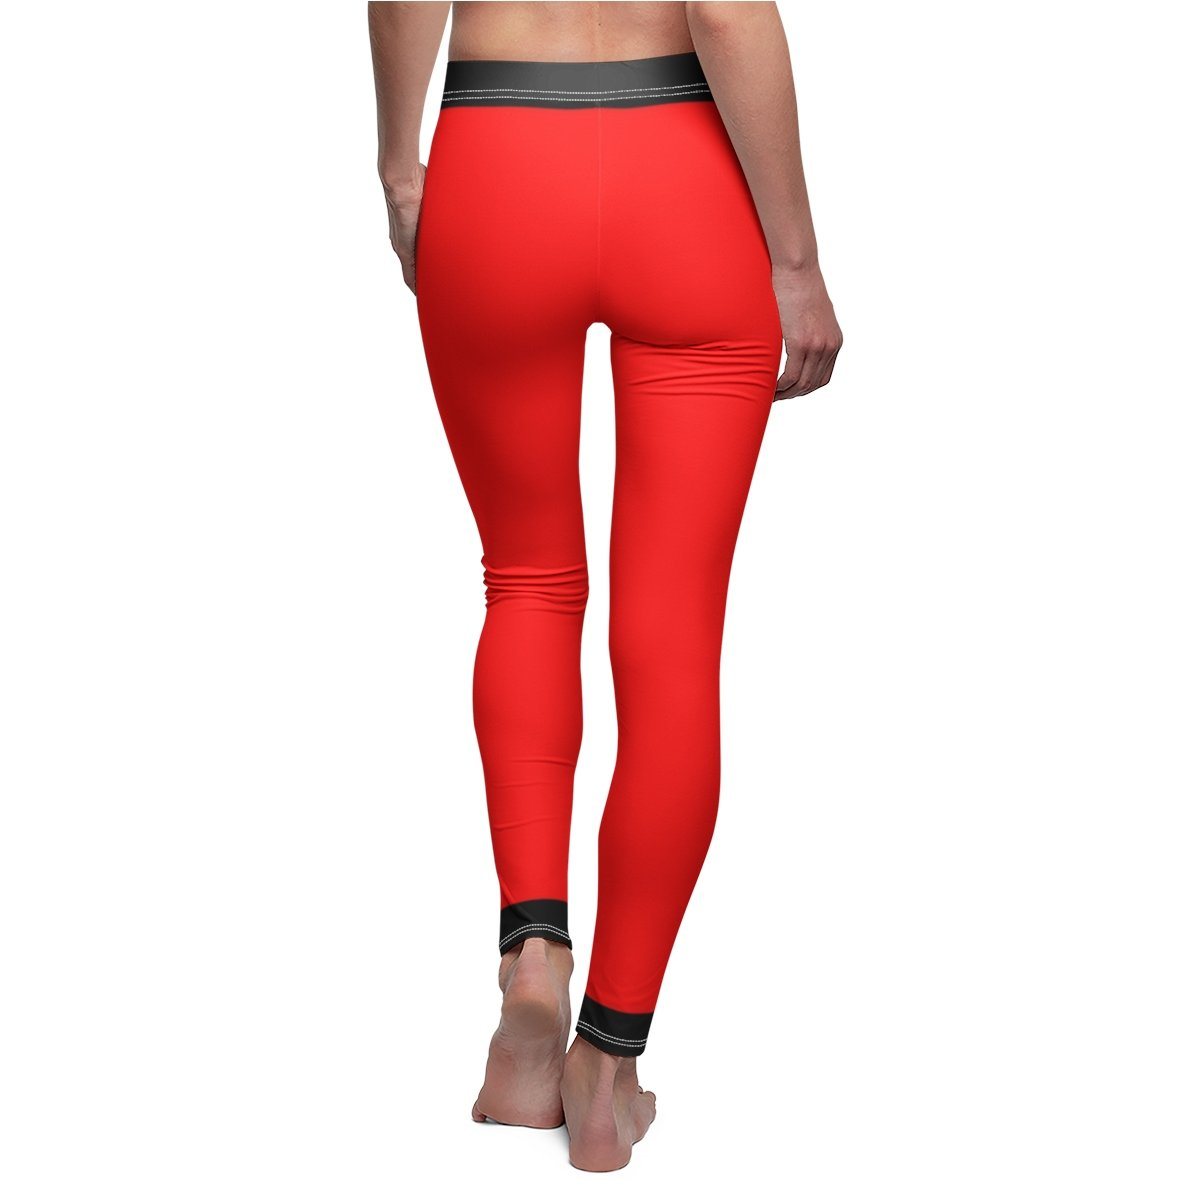 Mesh - V.3 - Extreme Sportswear Cut & Sew Leggings Template-Photoshop Template - Photo Solutions